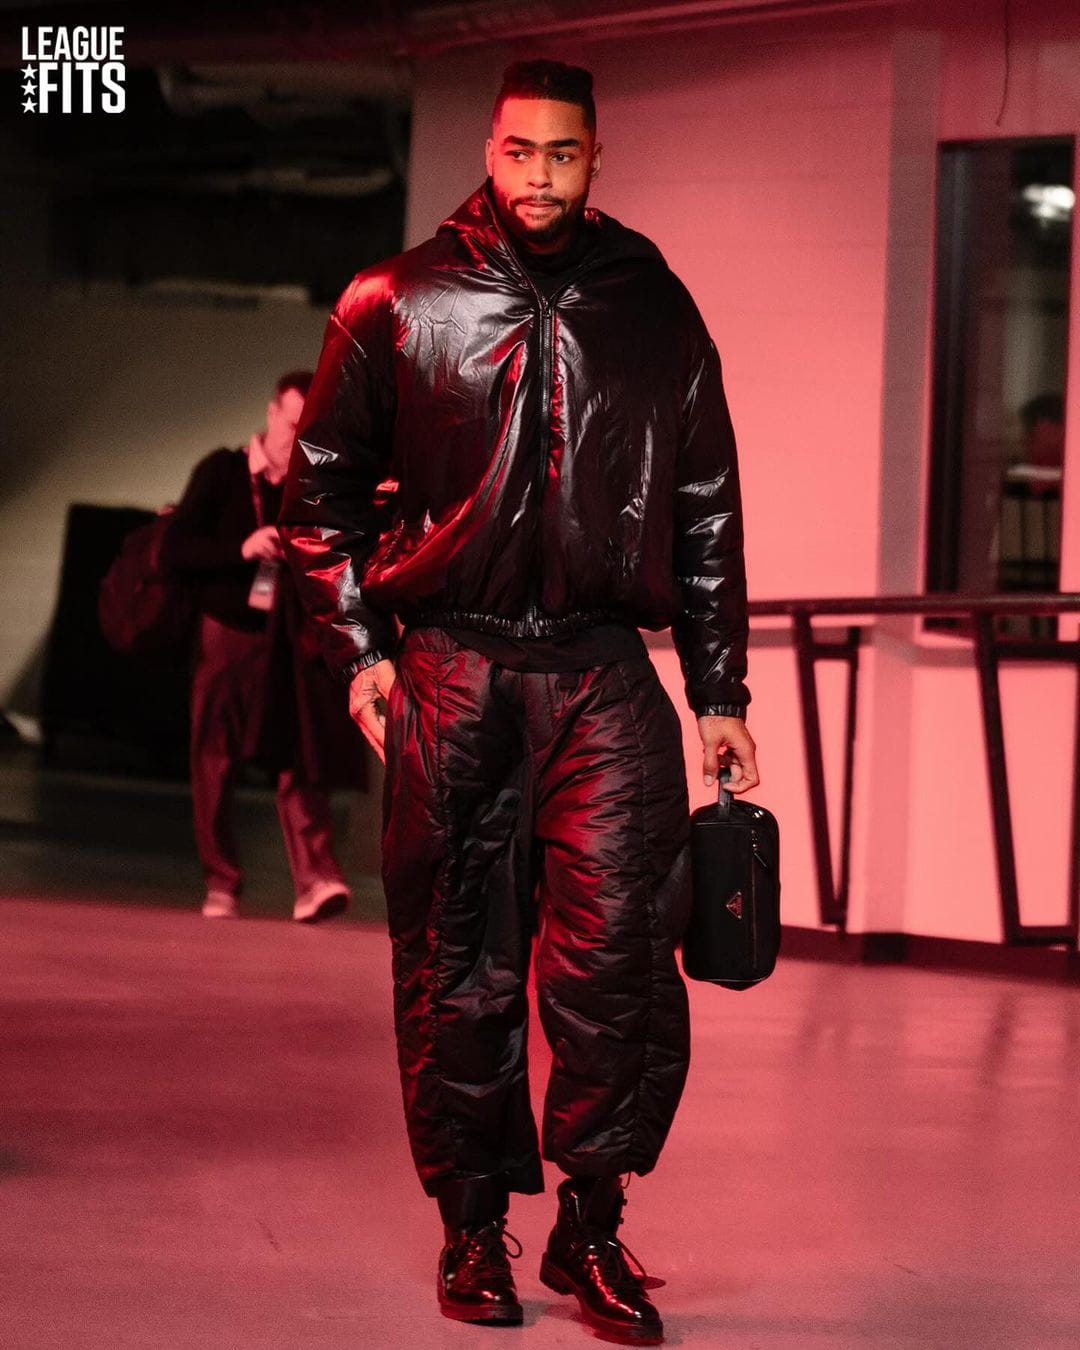 Fashion Slam Dunk: D’Angelo Russell’s Iconic Jacket Sparks Social Media Frenzy, Echoes of Missy Elliott’s ’97 Style